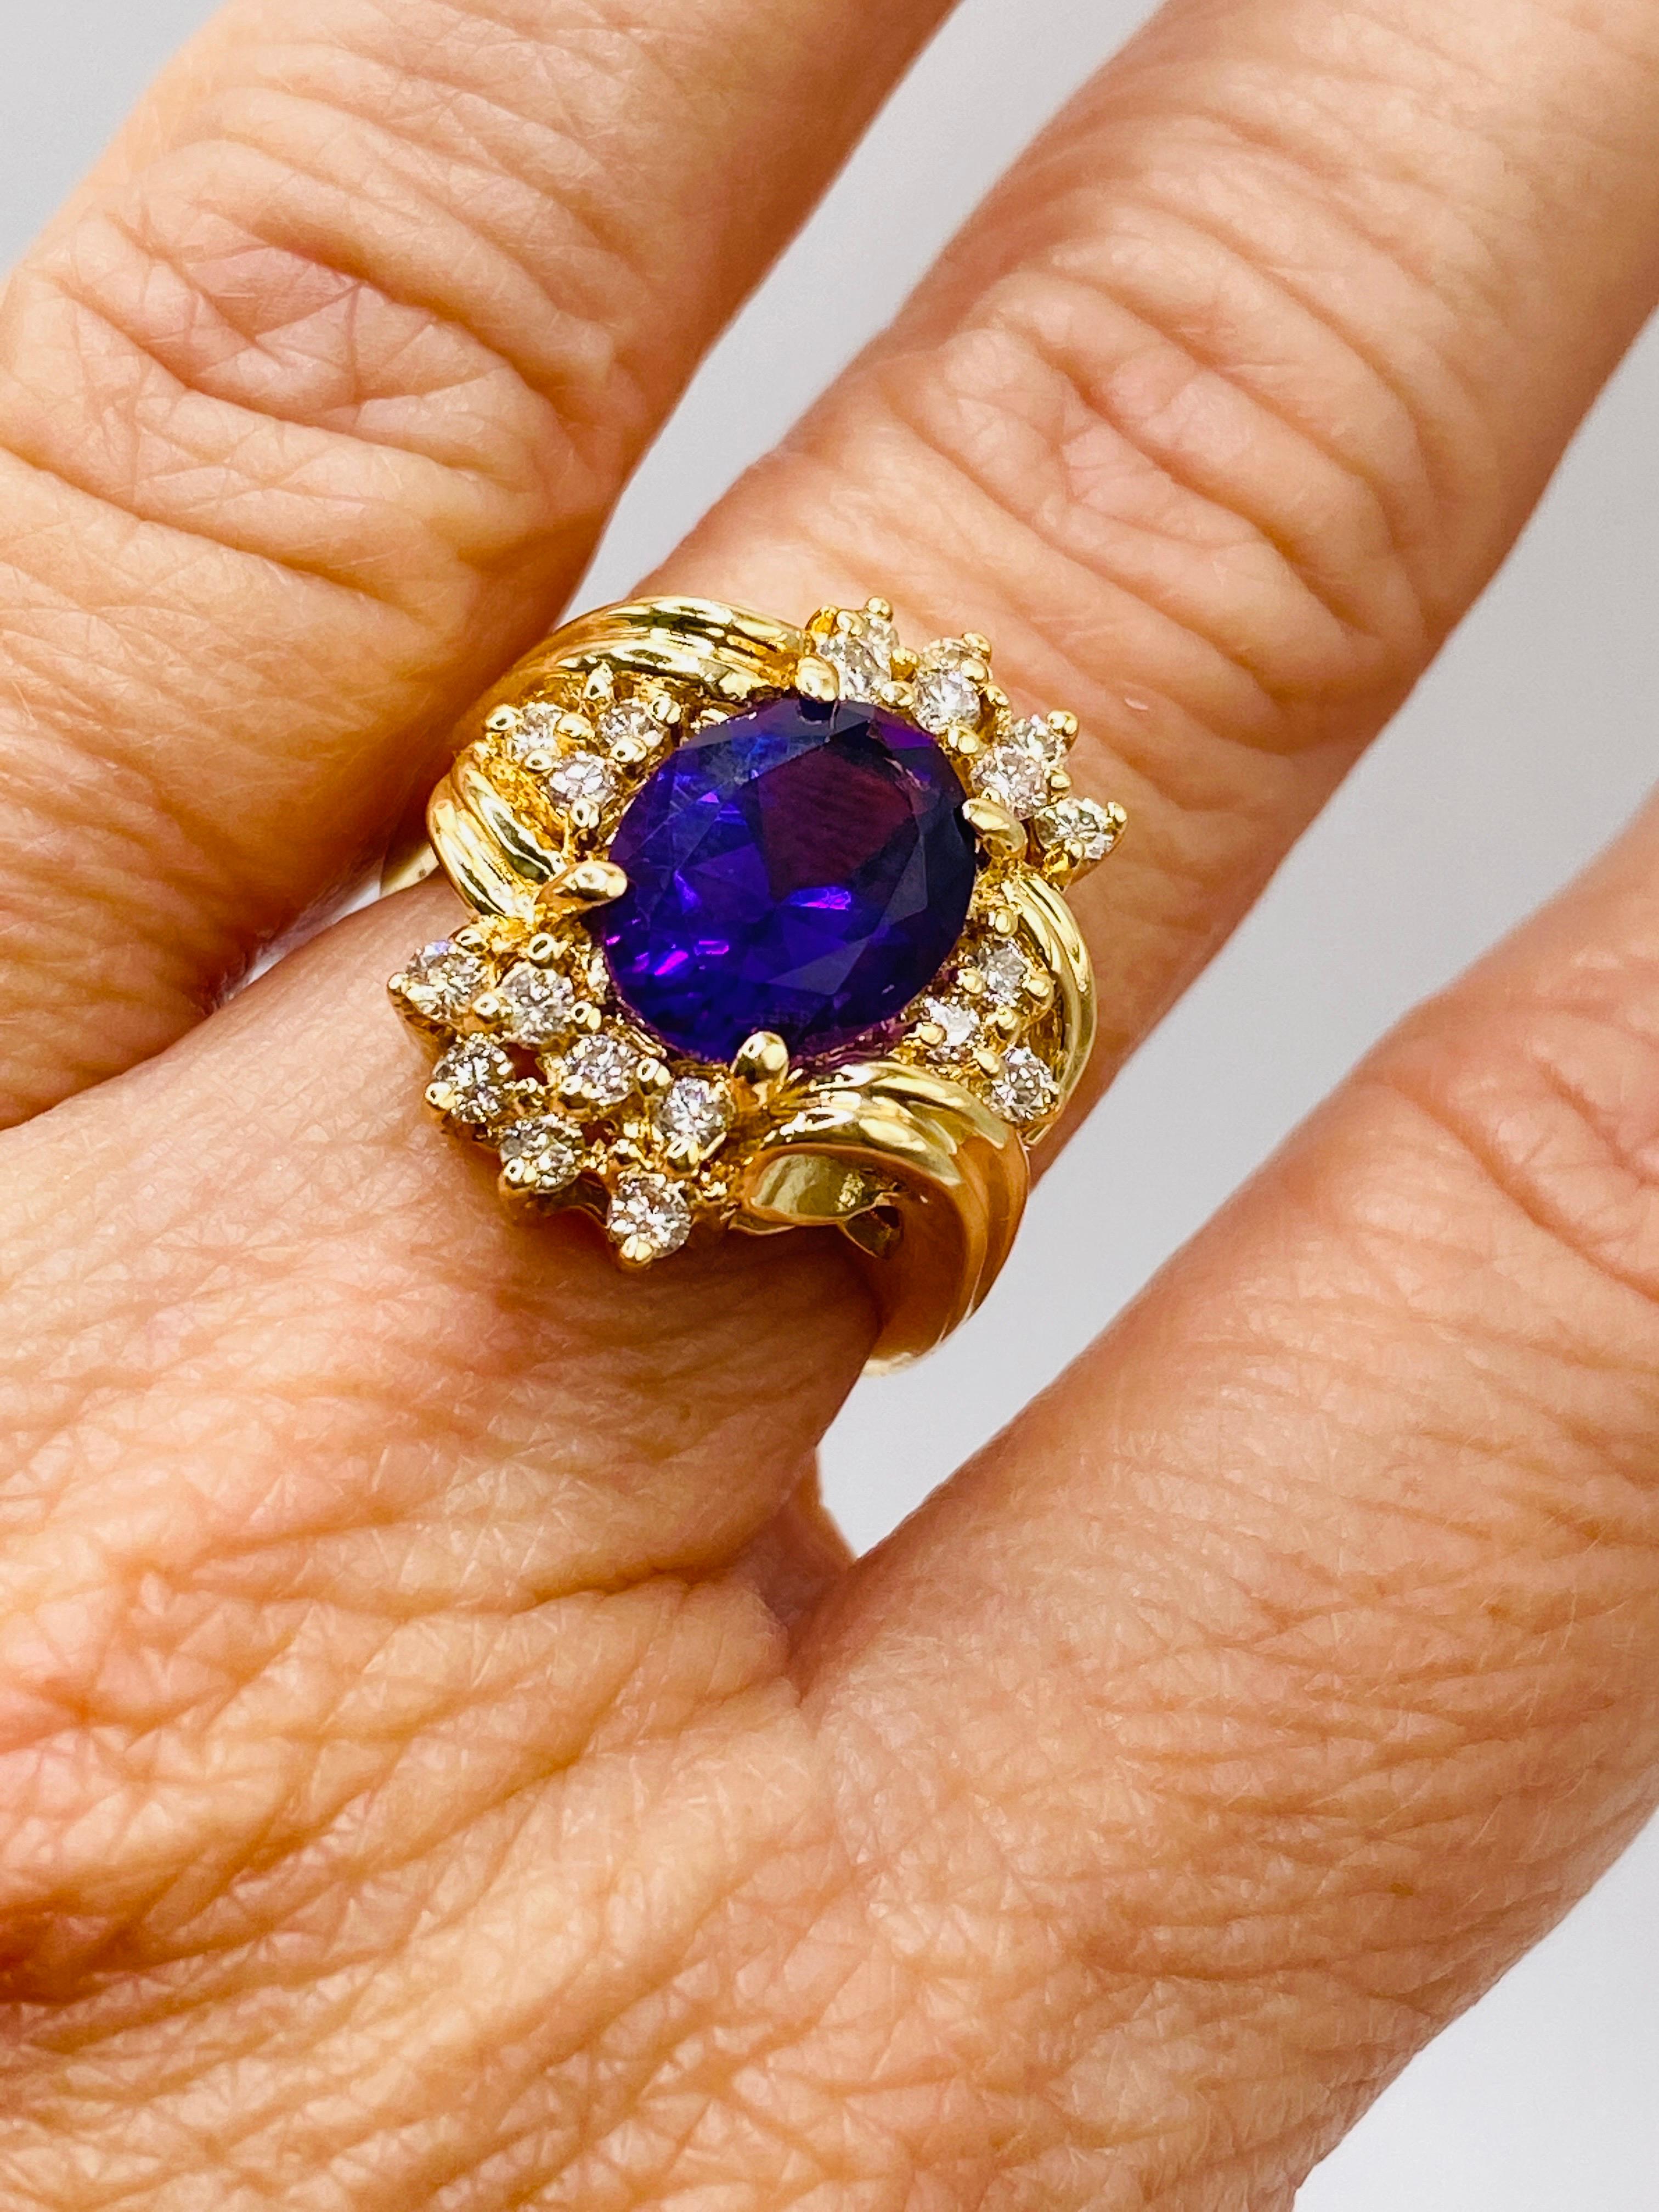 14k yellow gold ring with 1=oval amethyst and 20= round brilliant cut diamonds. Size 6.25, Dwt 5.3.